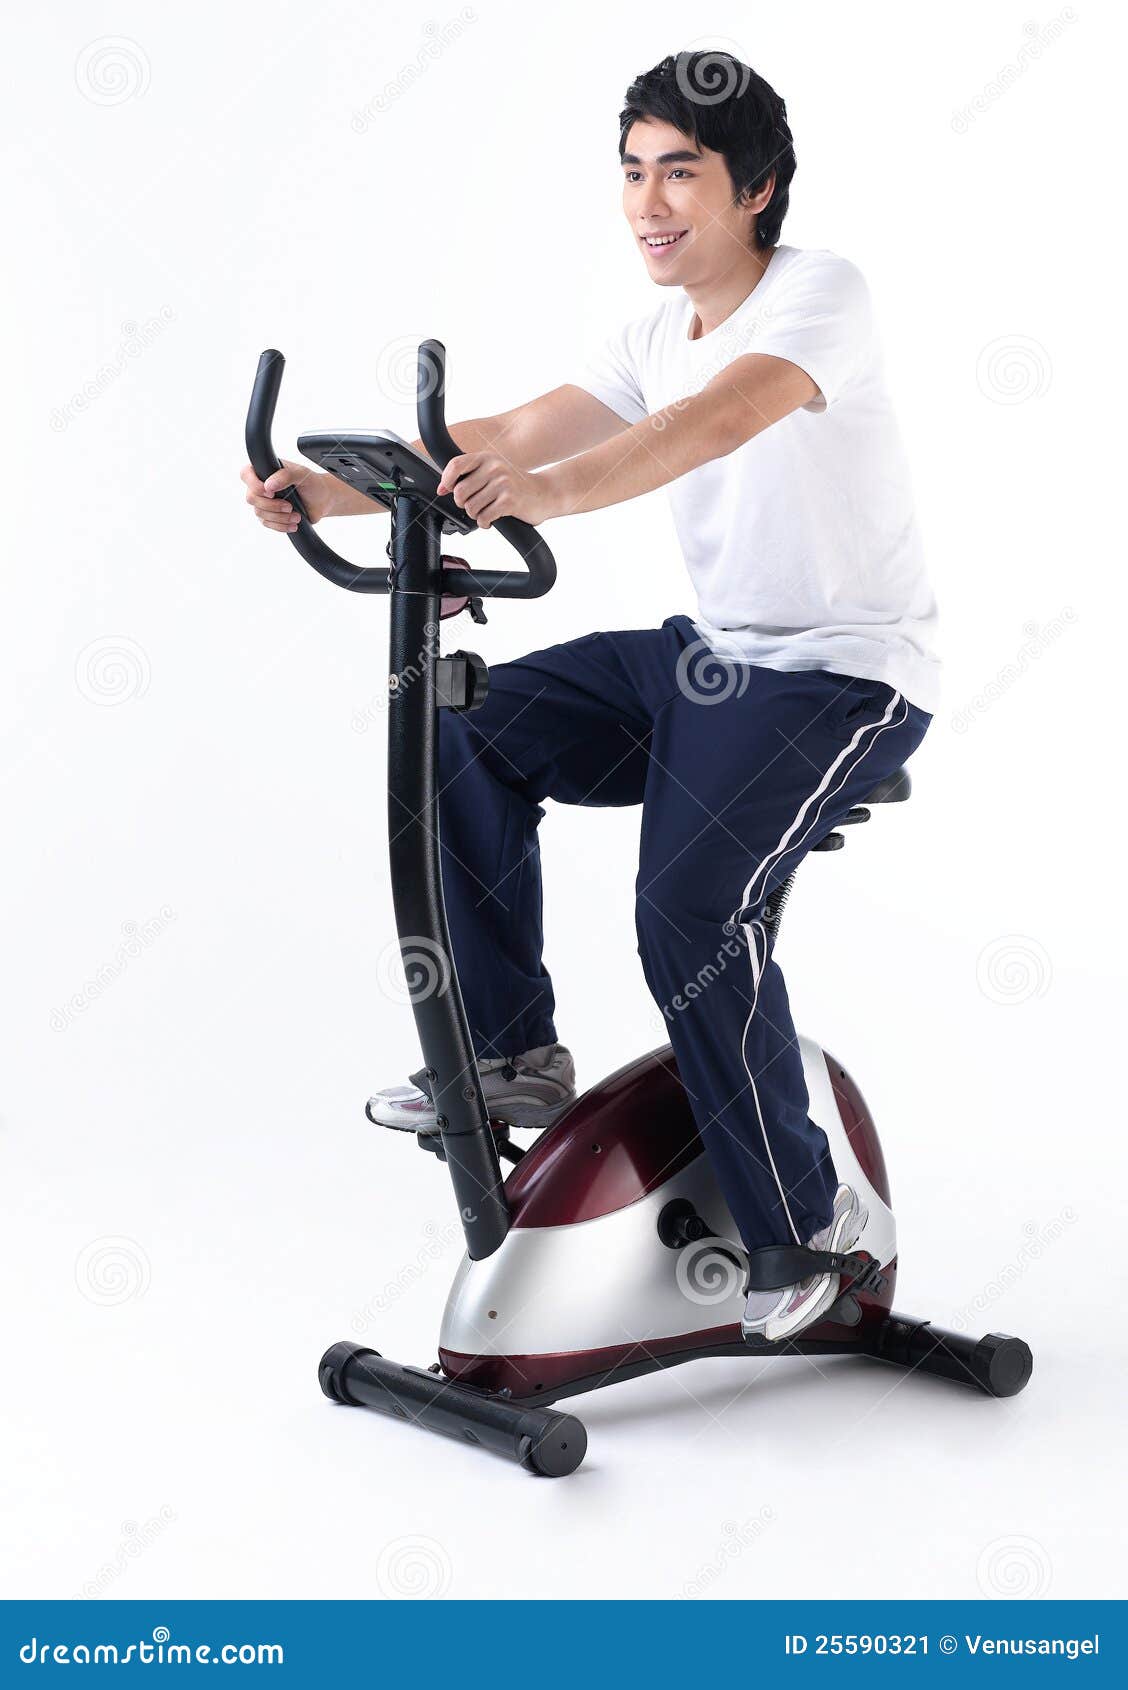 A Man Cycling Bicycle In A Gym Stock Image Image 25590321 inside Cycling Gym